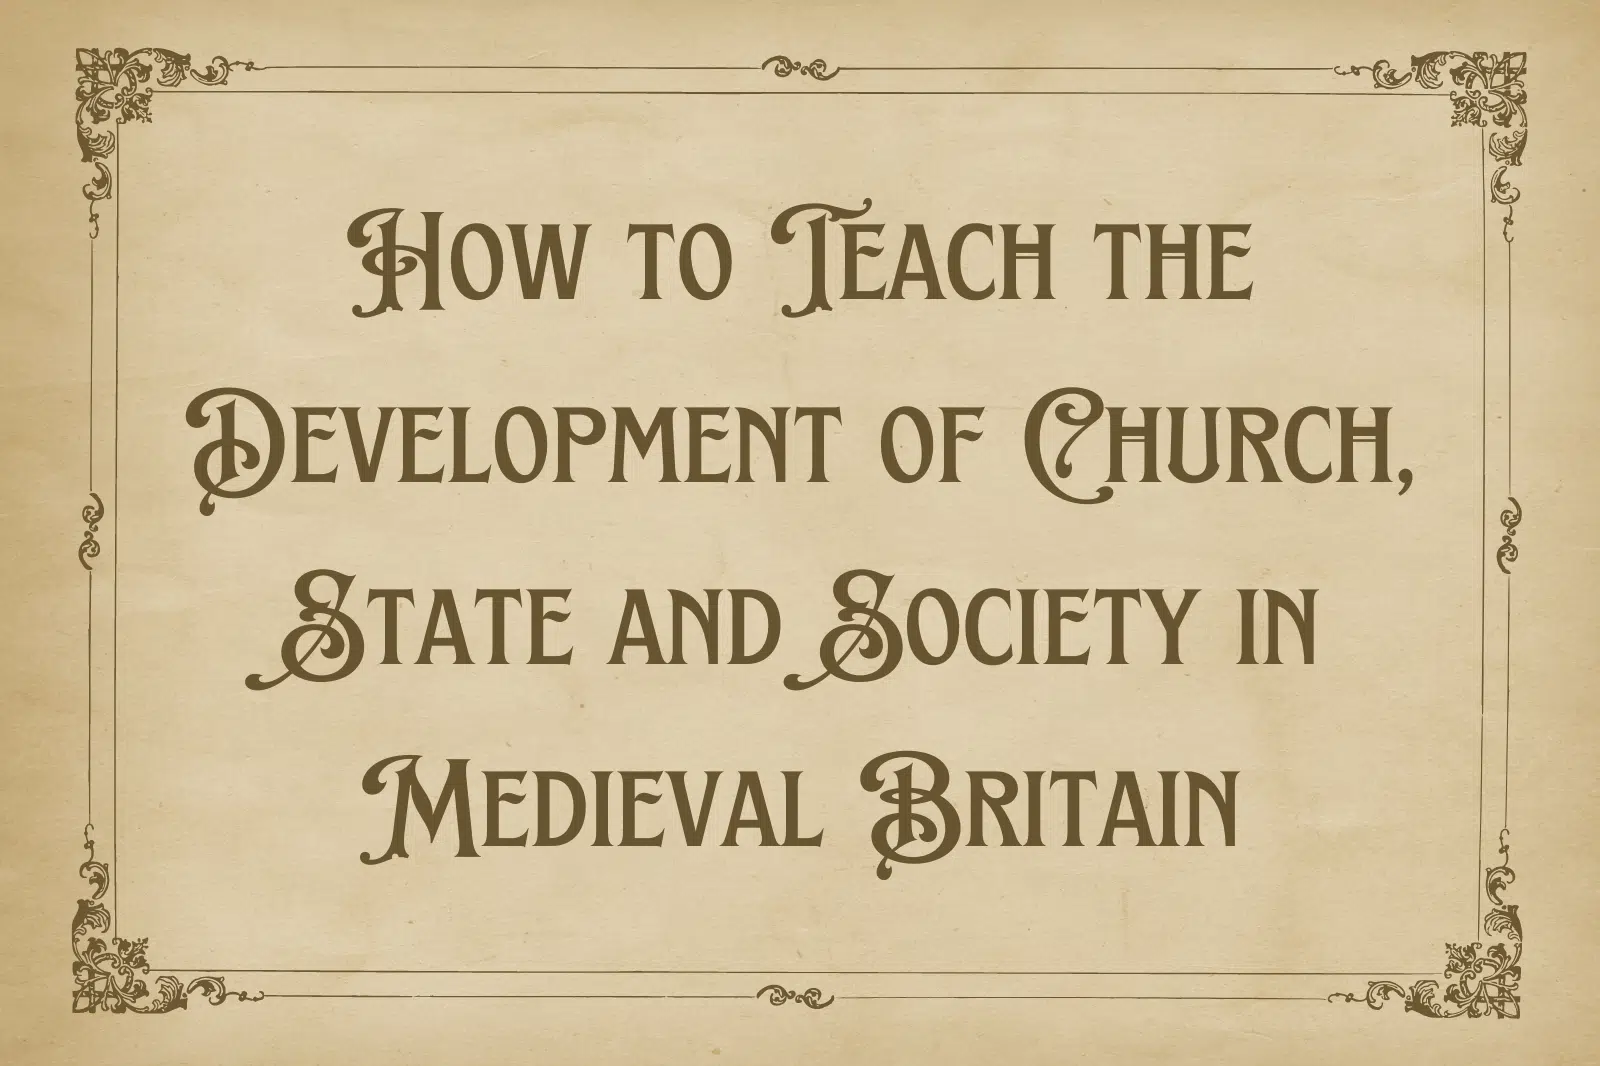 How to Teach the Development of Church, State and Society in Medieval Britain